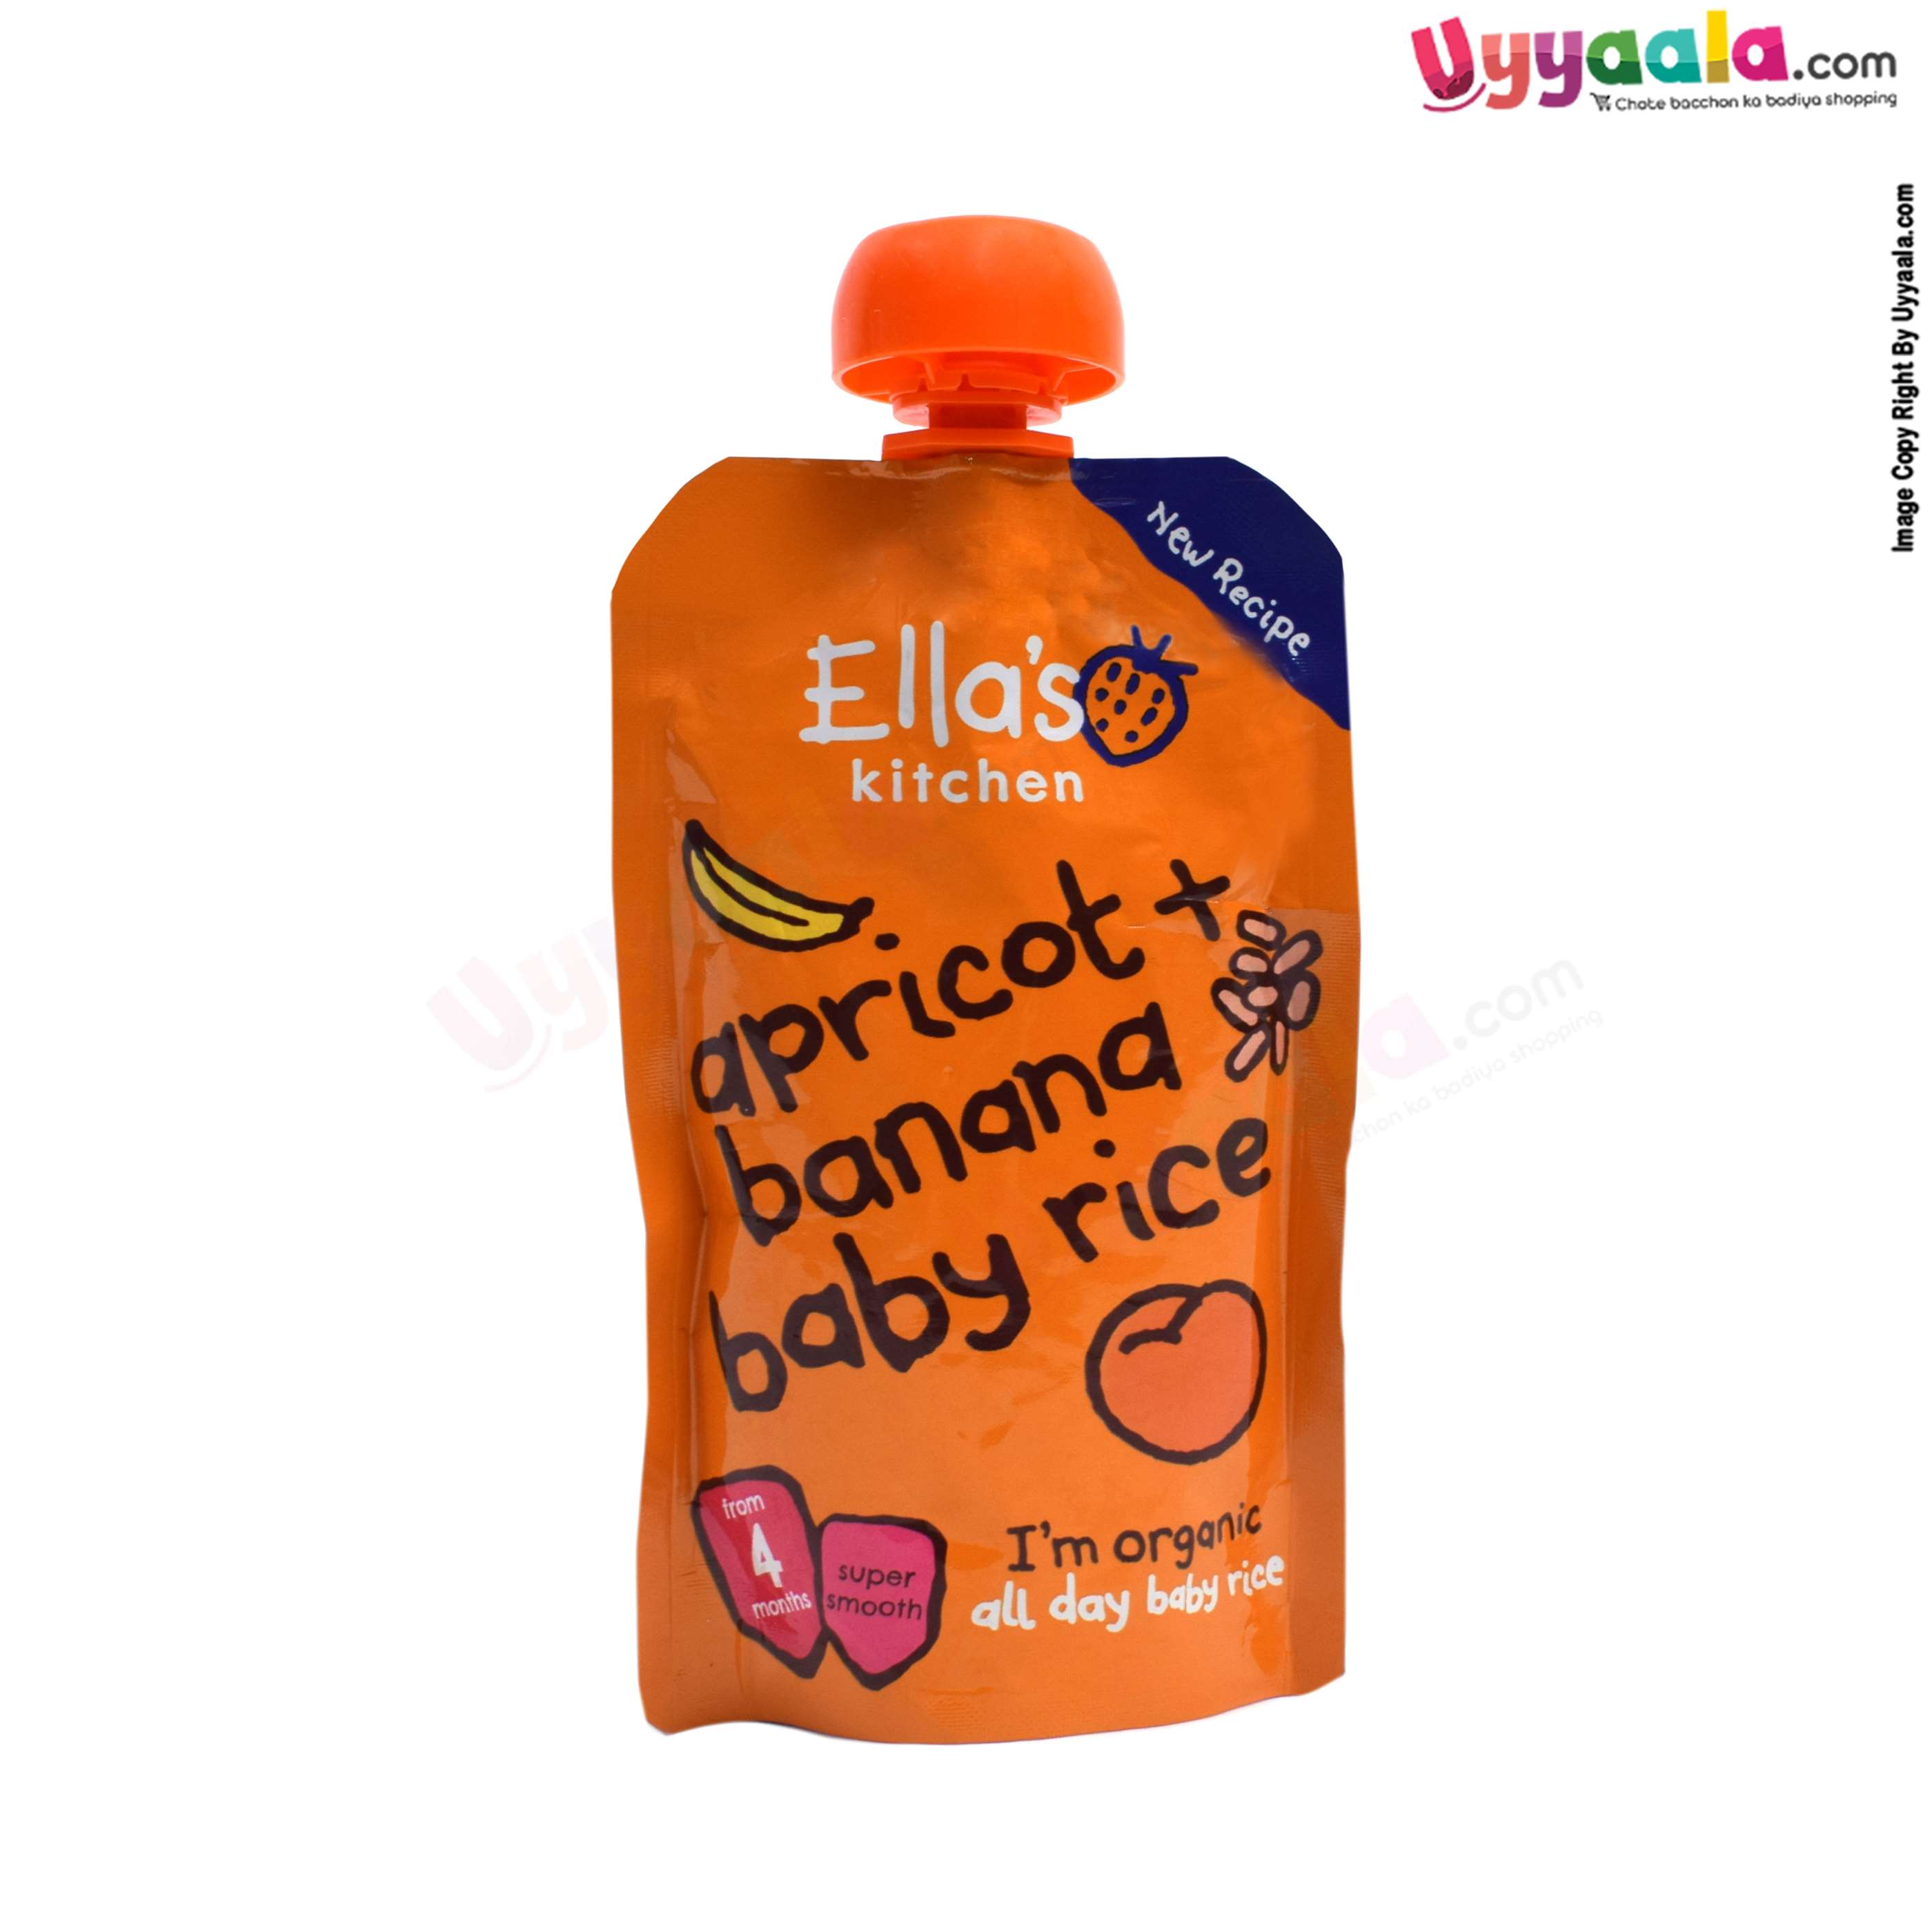 ELLA'S KITCHEN Apricot + banana baby rice, super smooth purees for babies - 120gm, 4 months +